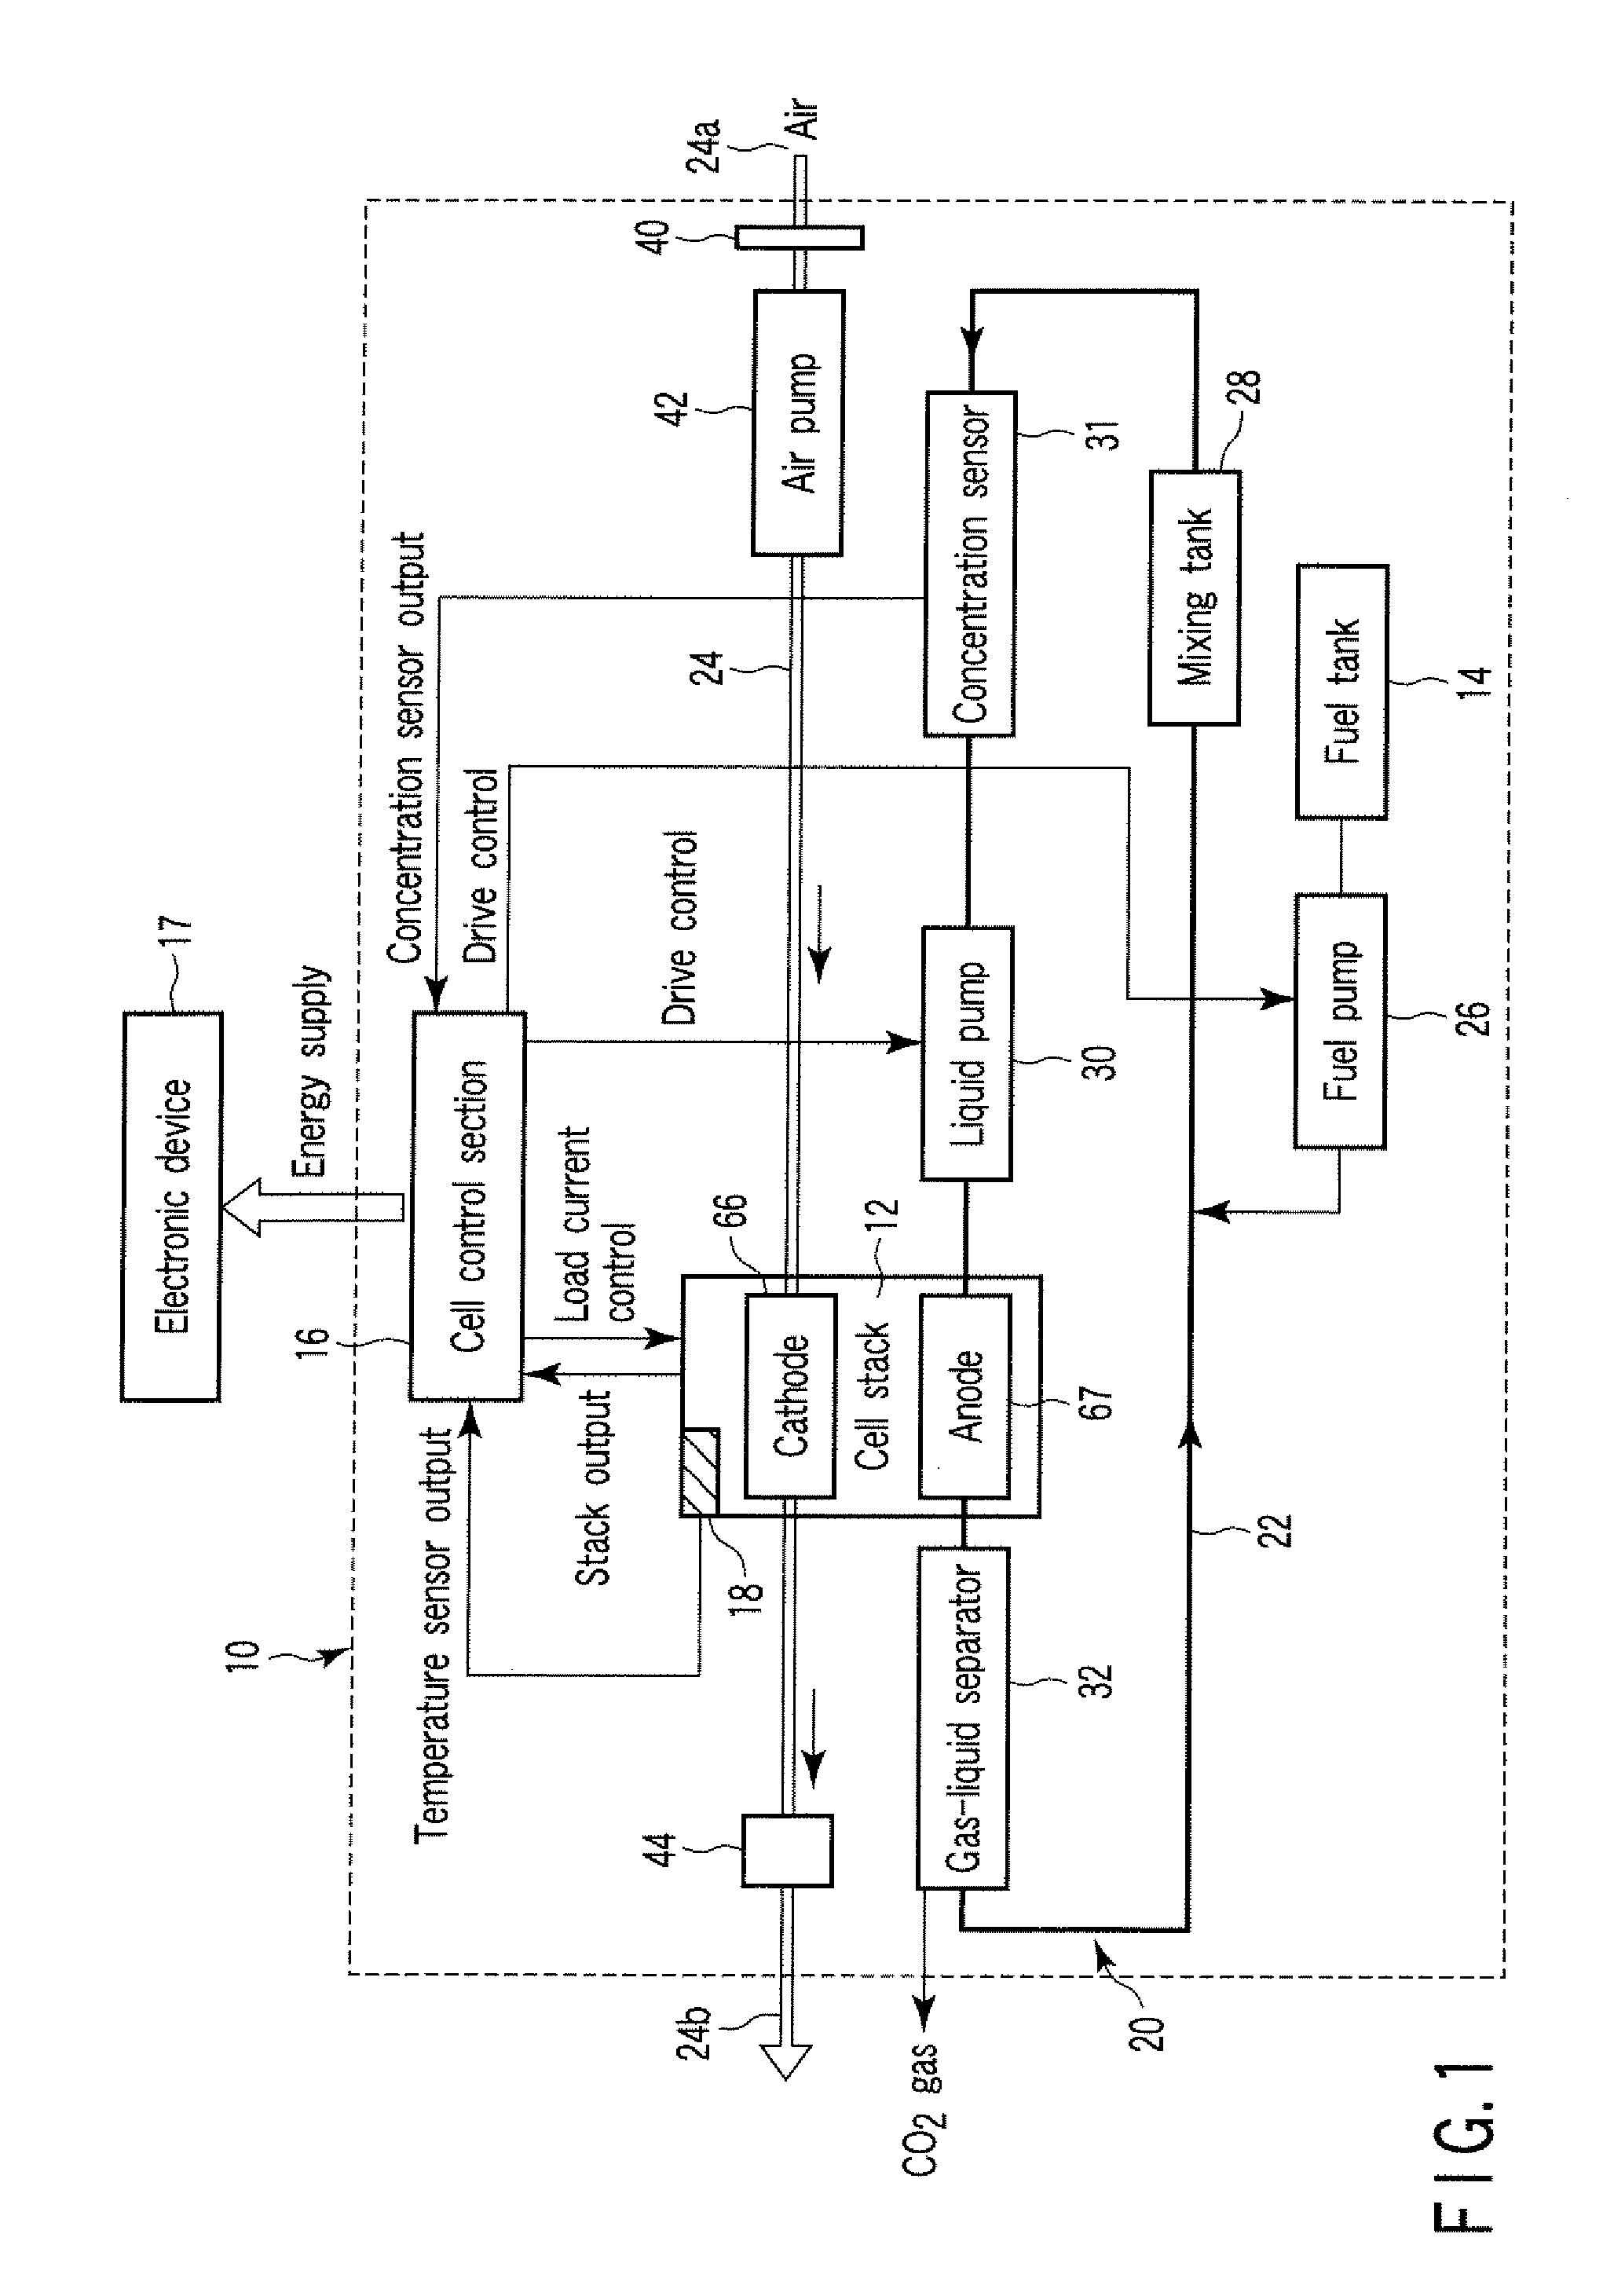 Method of driving fuel cell device